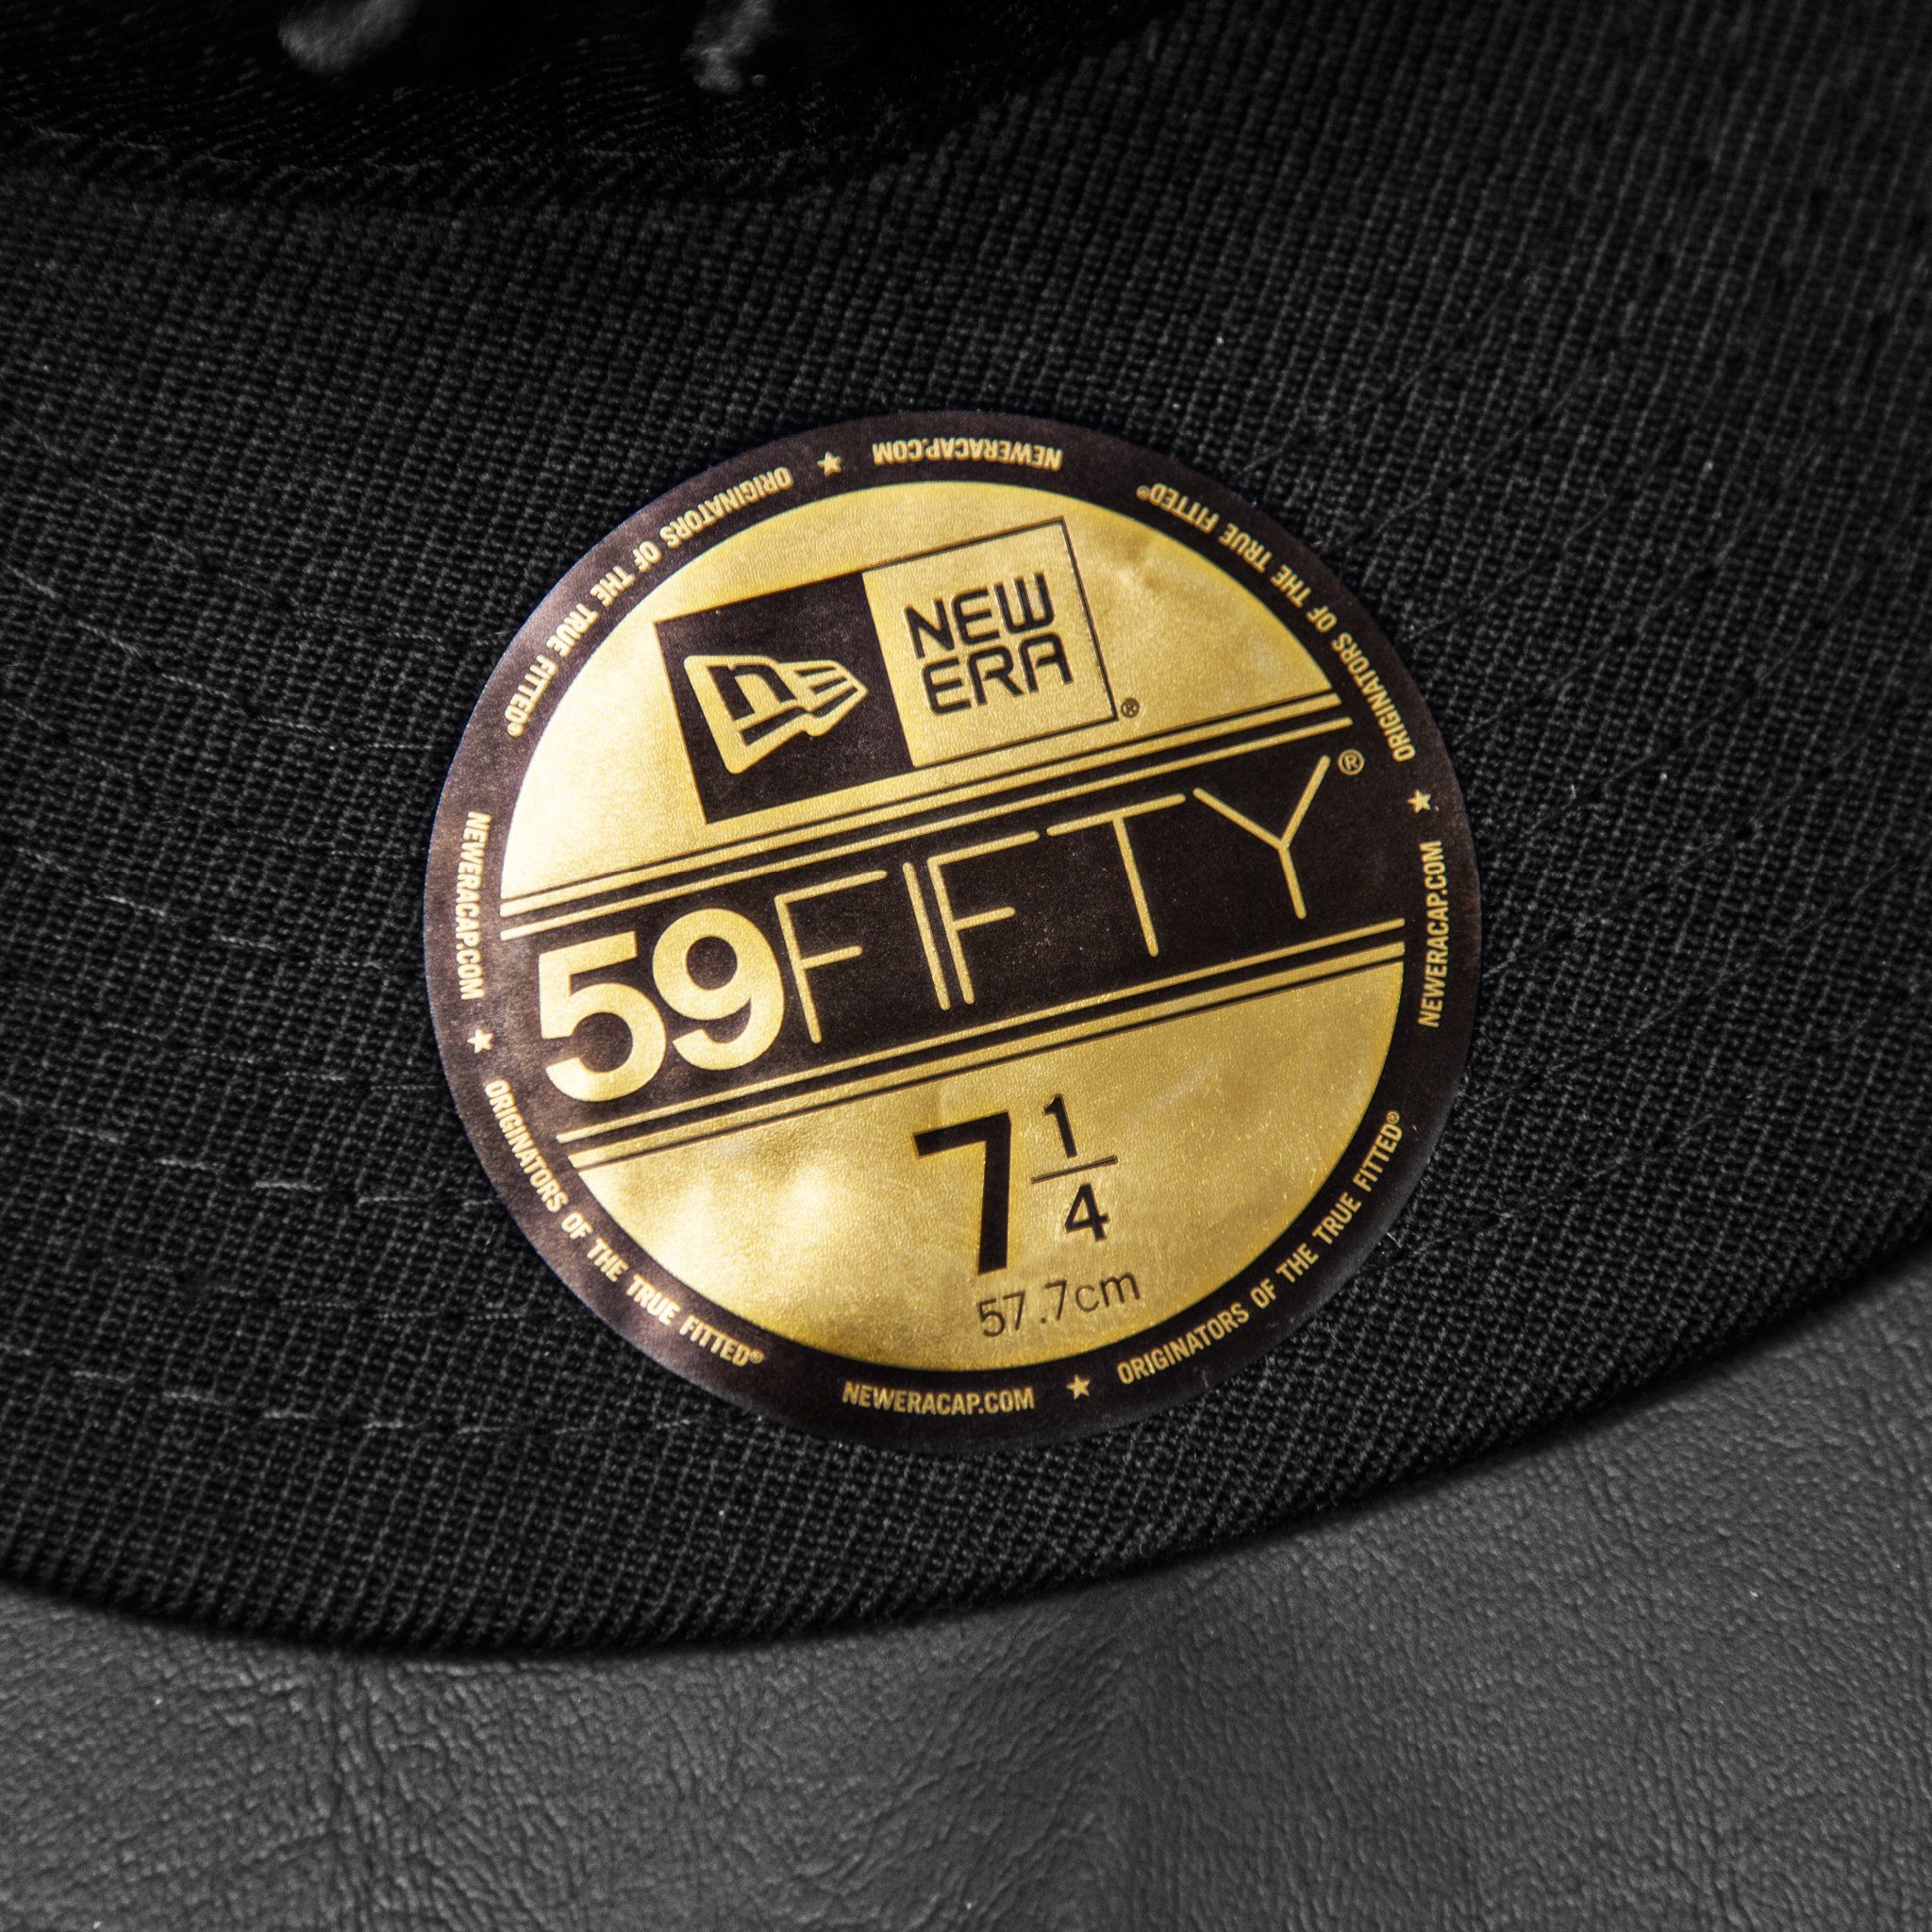 leg uit De volgende Ontslag neweraeurope on Twitter: "Since its introduction in 1994, the visor sticker  of the #59FIFTY remains unchanged, undiluted and unmistakably gold.  #NewEraCap https://t.co/Pv2FAwwPdl" / X